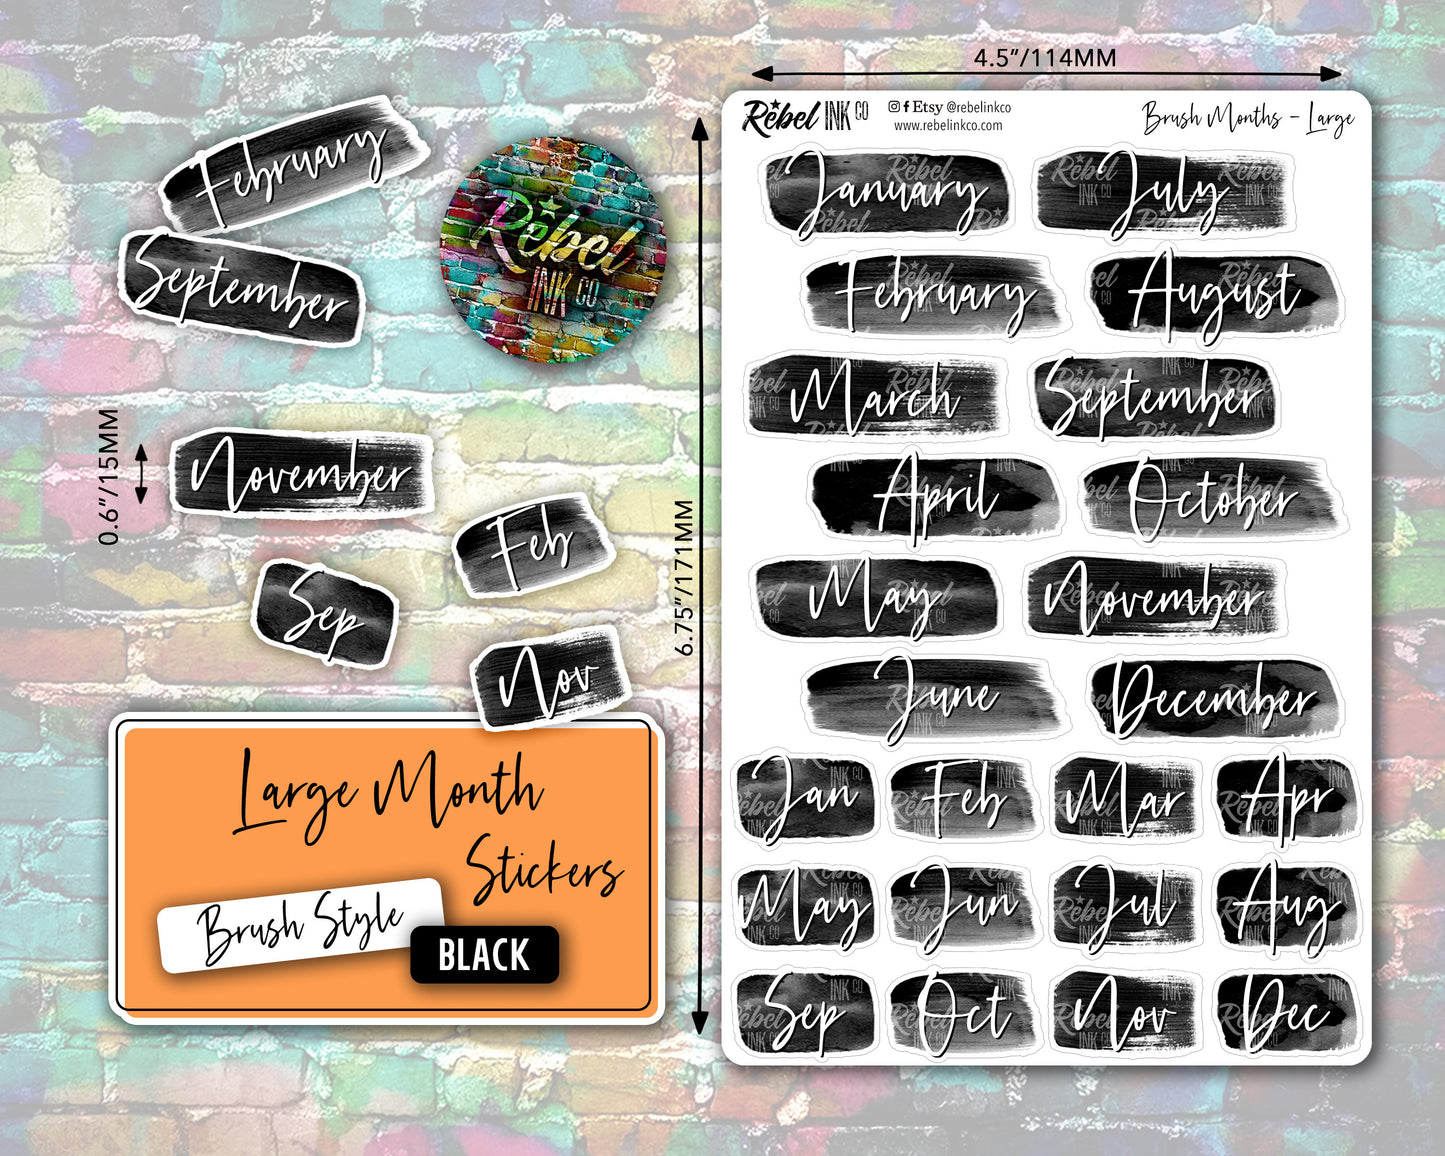 Month Stickers - Large - Black - Brush Style